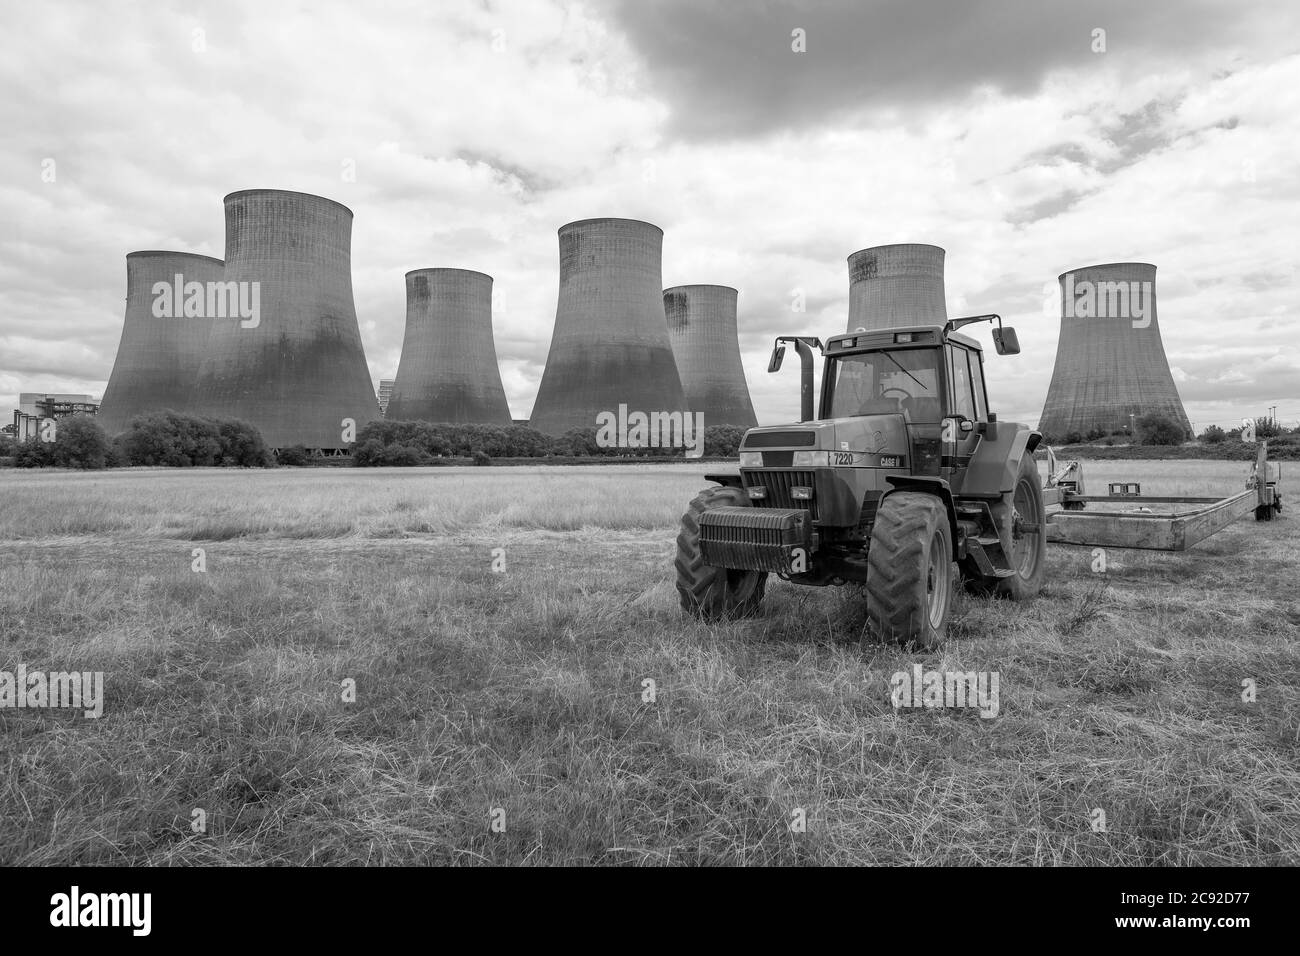 Farm tractor in a field in front of a power station Stock Photo